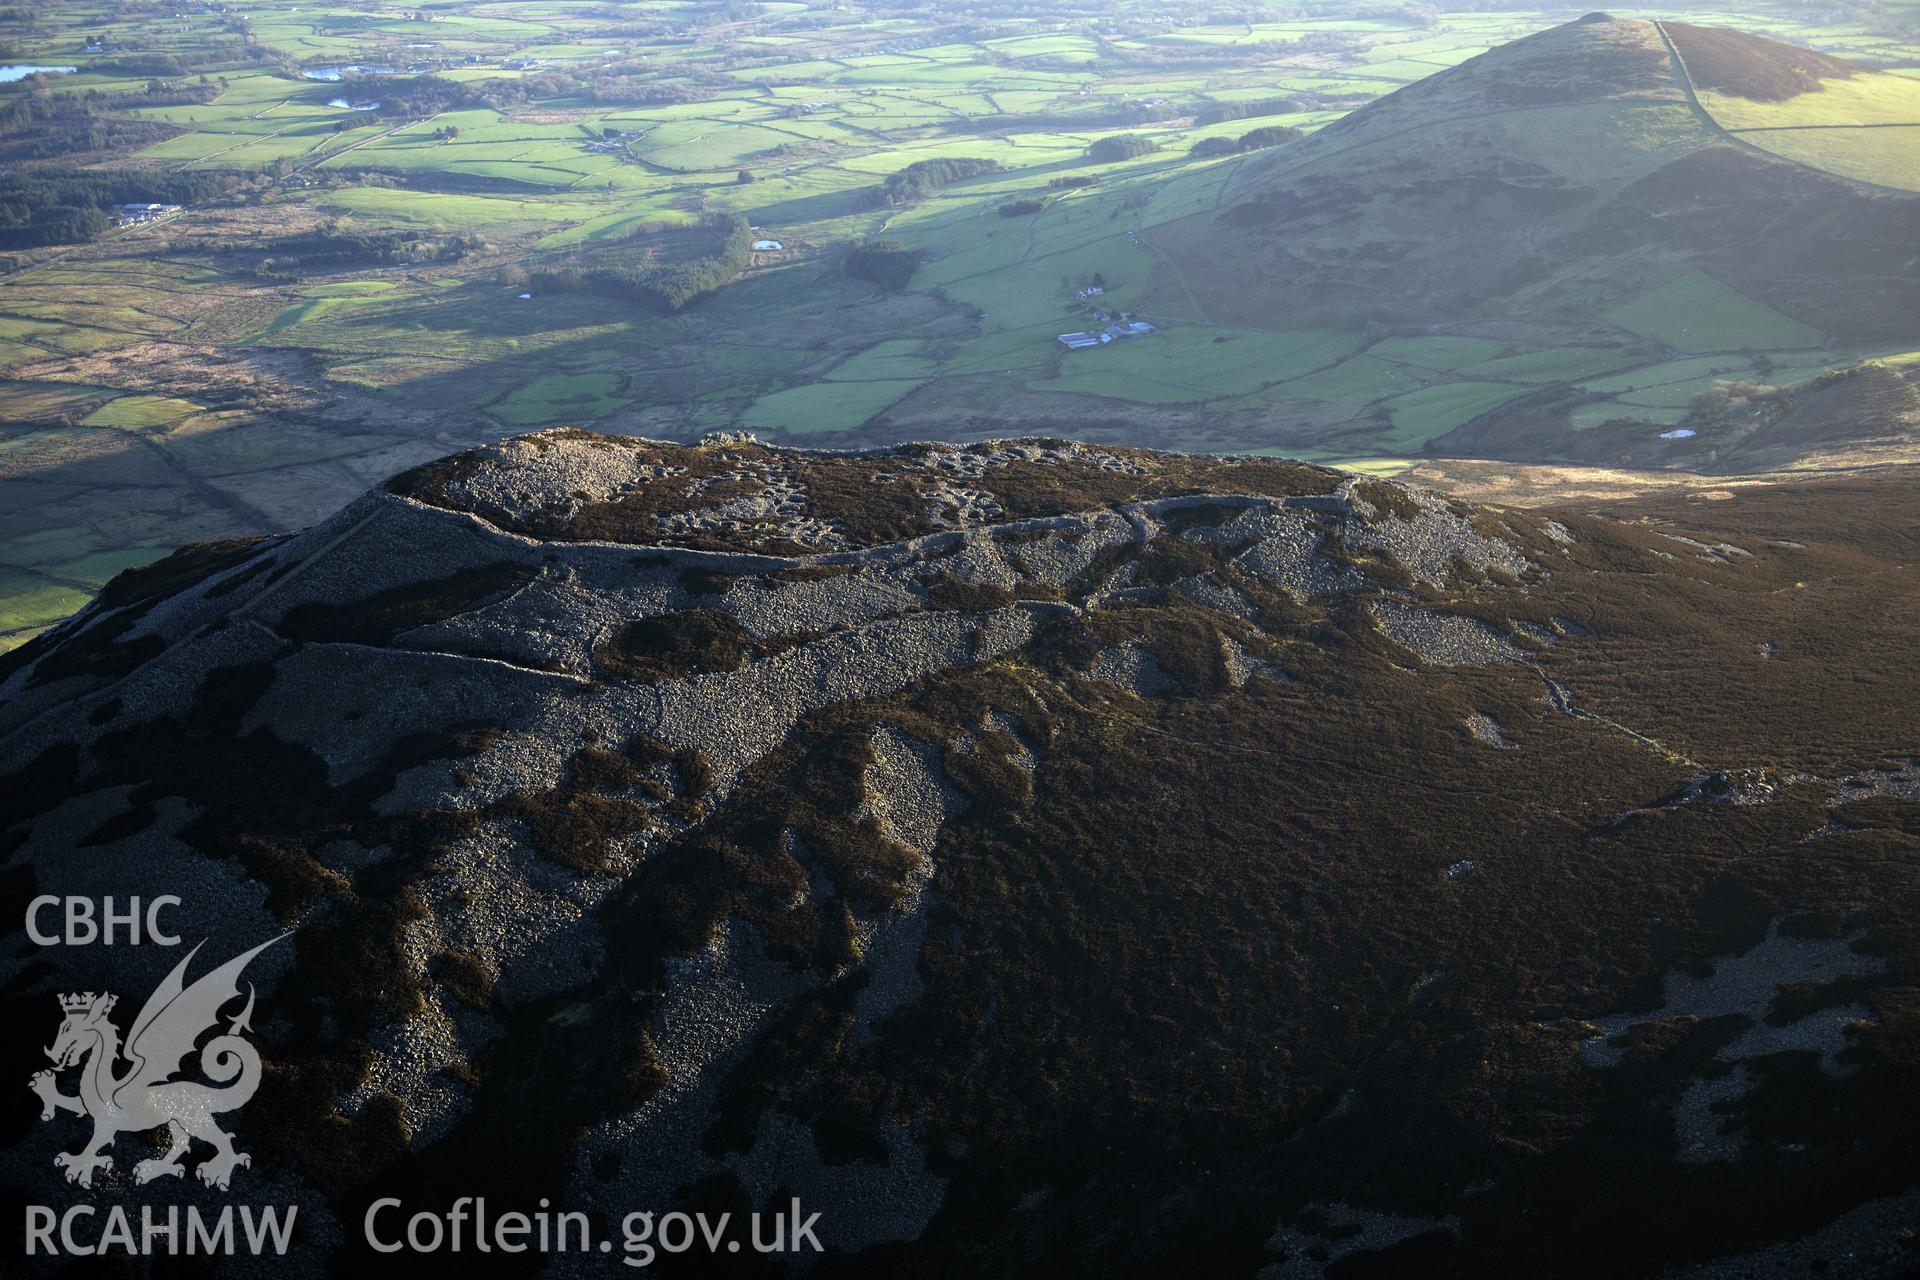 RCAHMW colour oblique photograph of Tre'r Ceiri hillfort. Taken by Toby Driver on 10/12/2012.